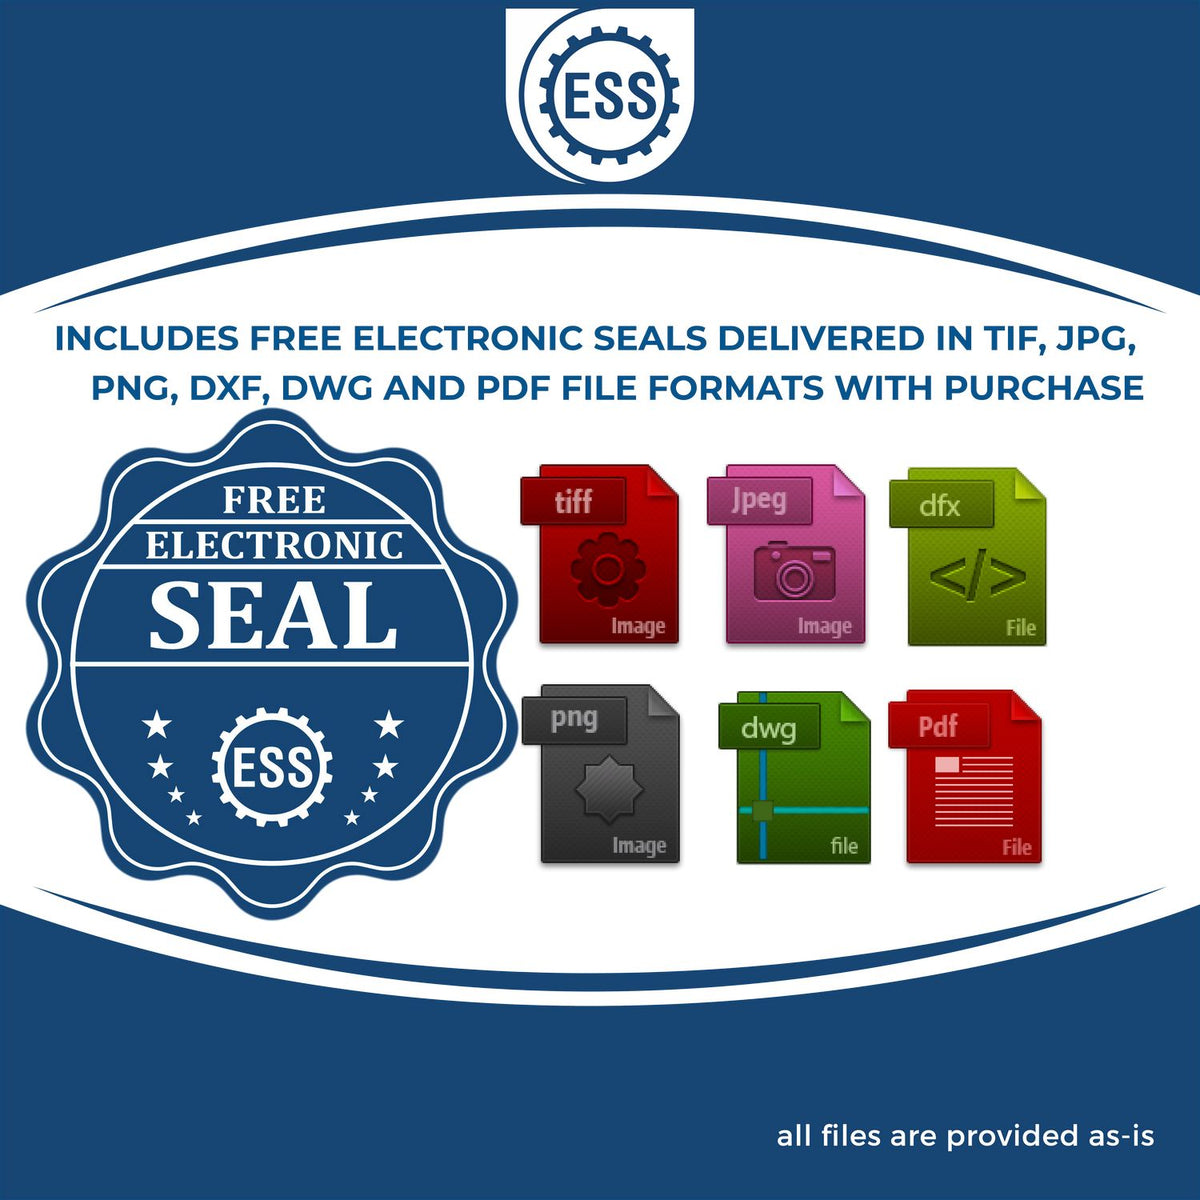 An infographic for the free electronic seal for the Premium MaxLight Pre-Inked New York Geology Stamp illustrating the different file type icons such as DXF, DWG, TIF, JPG and PNG.